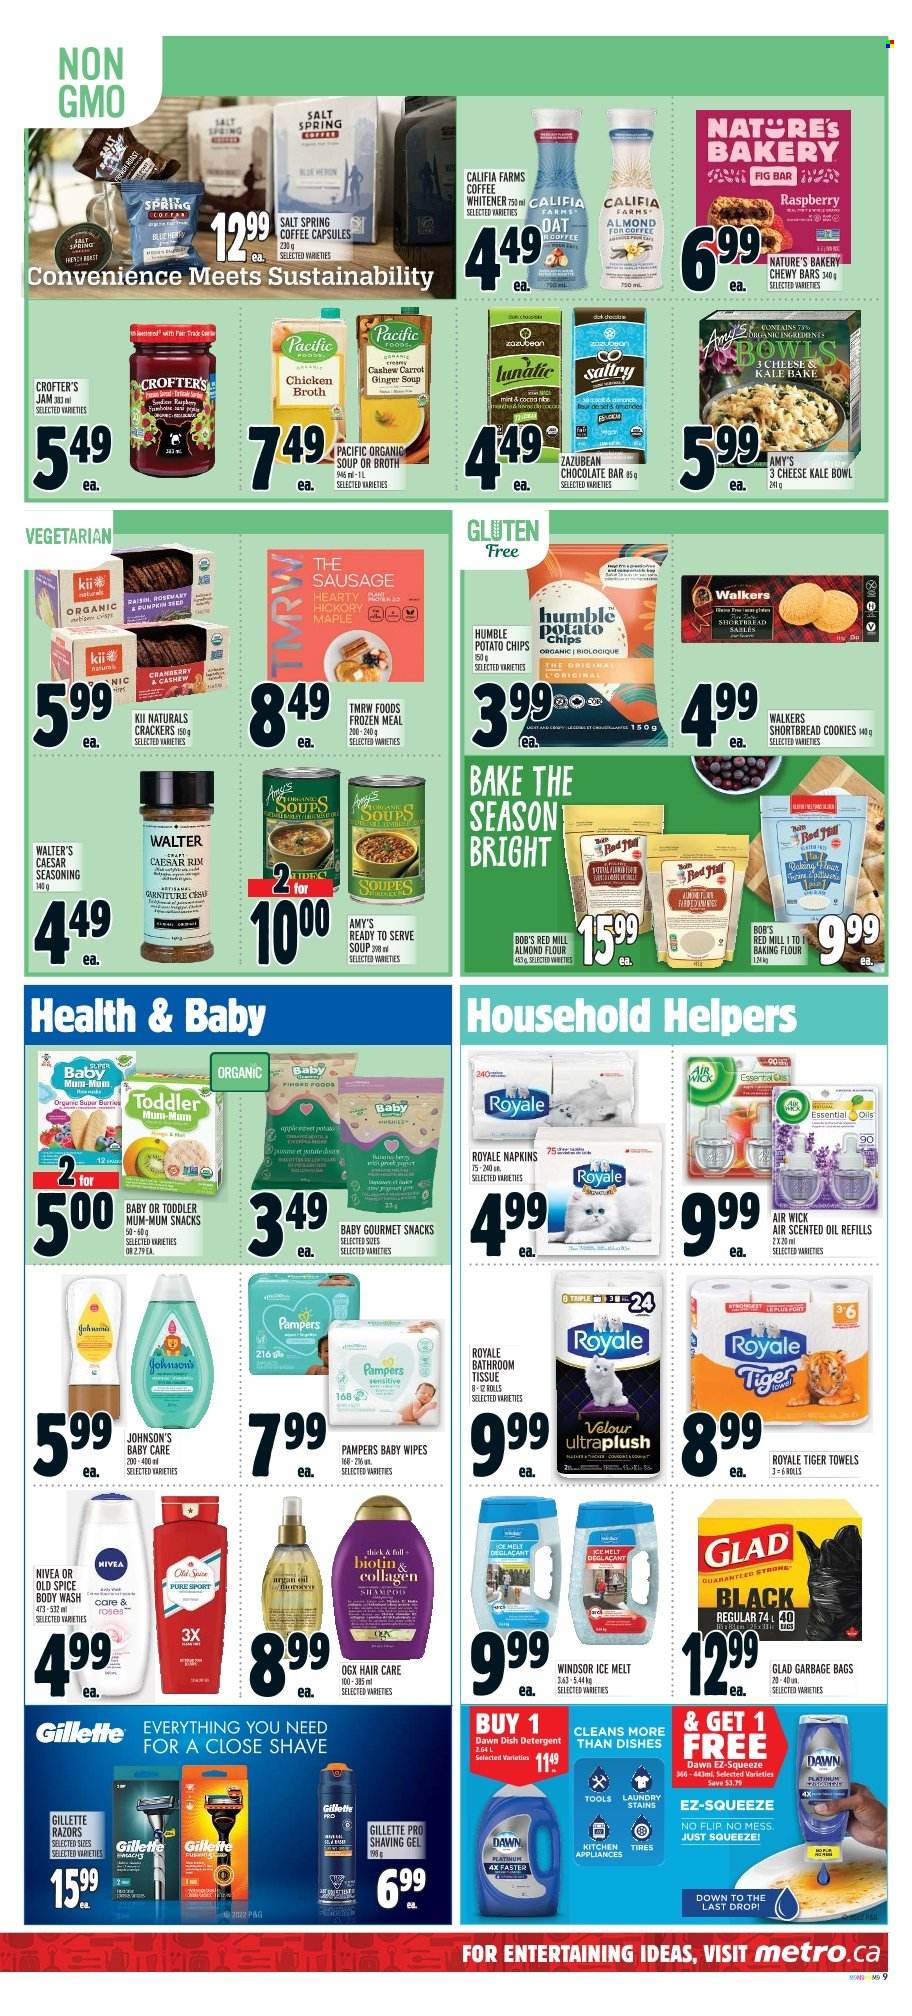 thumbnail - Metro Flyer - December 01, 2022 - December 07, 2022 - Sales products - ginger, soup, sausage, cookies, snack, crackers, chocolate bar, potato chips, cocoa, flour, salt, broth, almond flour, spice, fruit jam, coffee capsules, wipes, baby wipes, napkins, Johnson's, Nivea, bath tissue, Rin, dishwasher cleaner, body wash, Gillette, OGX, Mum, bag, pot, bowl, Air Wick, scented oil, essential oils, towel, rose, Biotin, argan oil, detergent, shampoo, Pampers, Old Spice. Page 8.